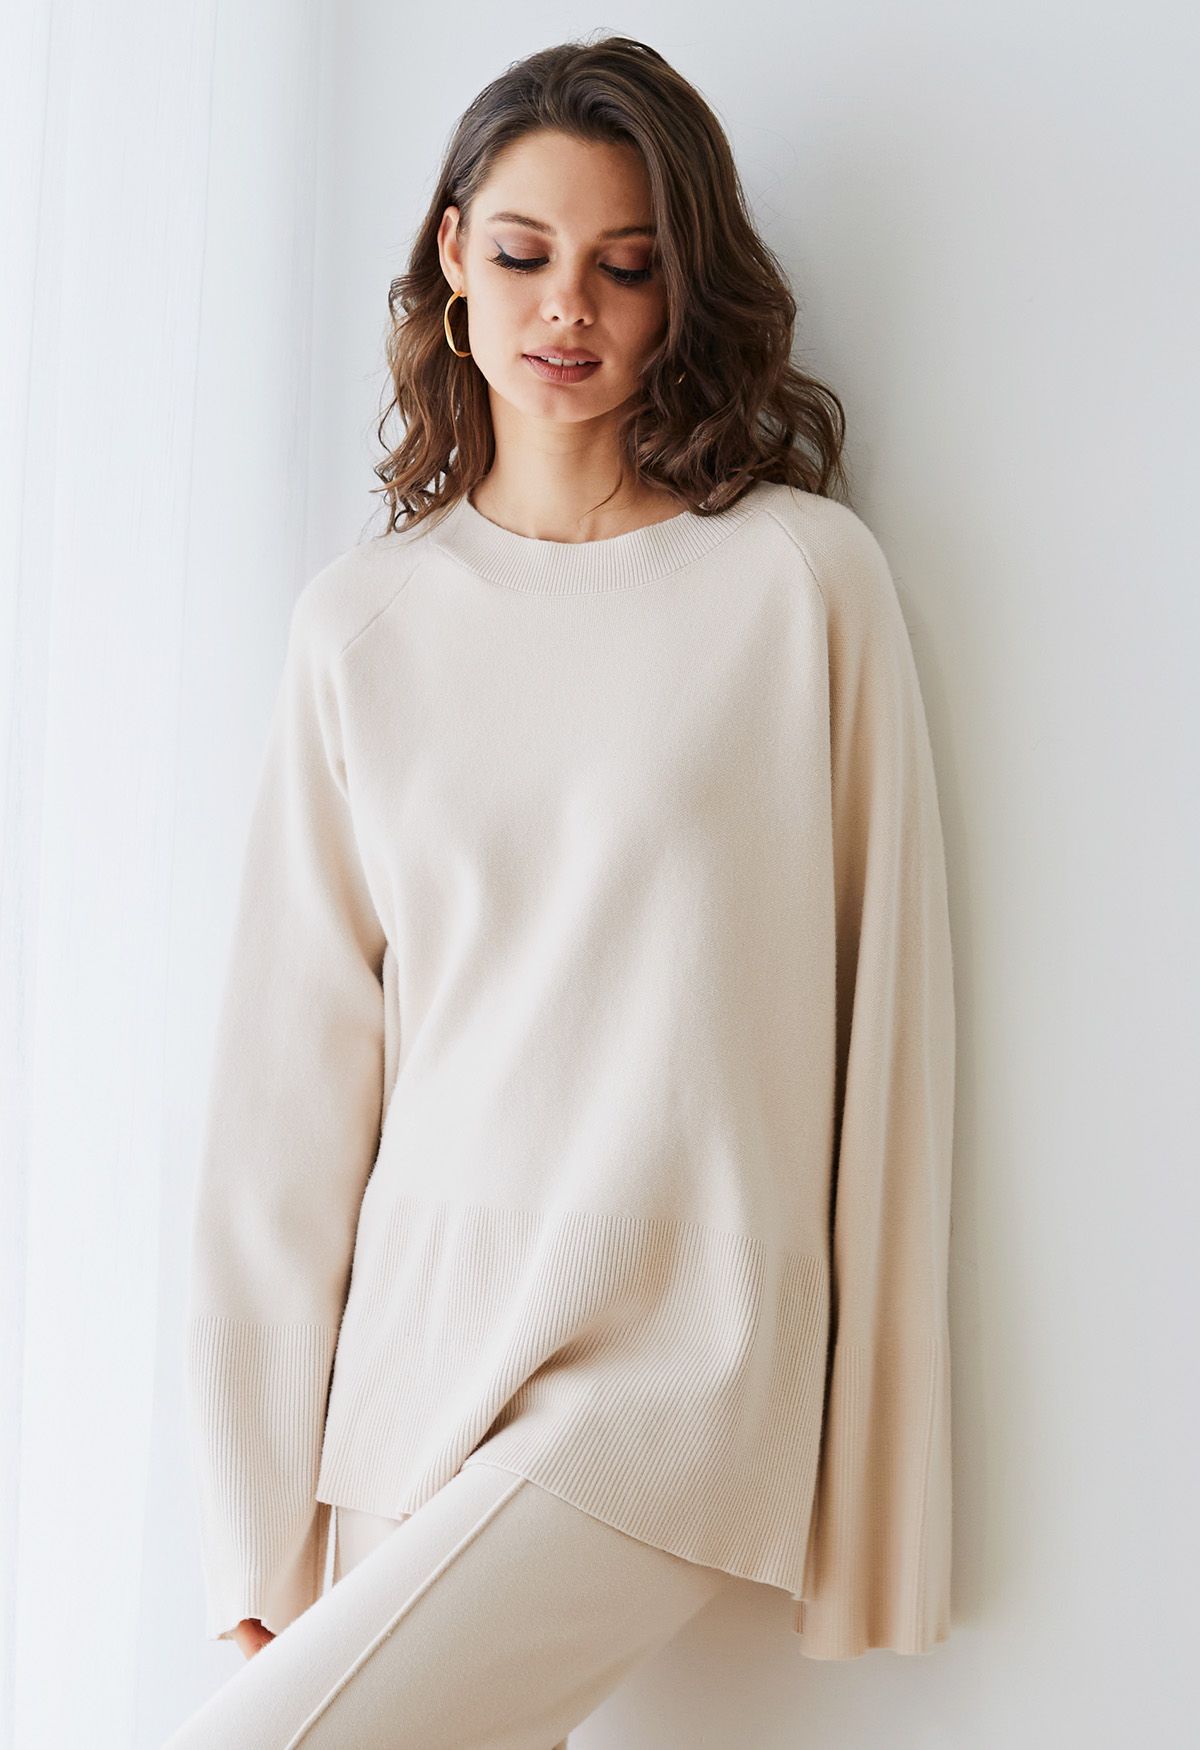 Slit Hem Ribbed Detail Soft Knit Sweater in Oatmeal | Chicwish